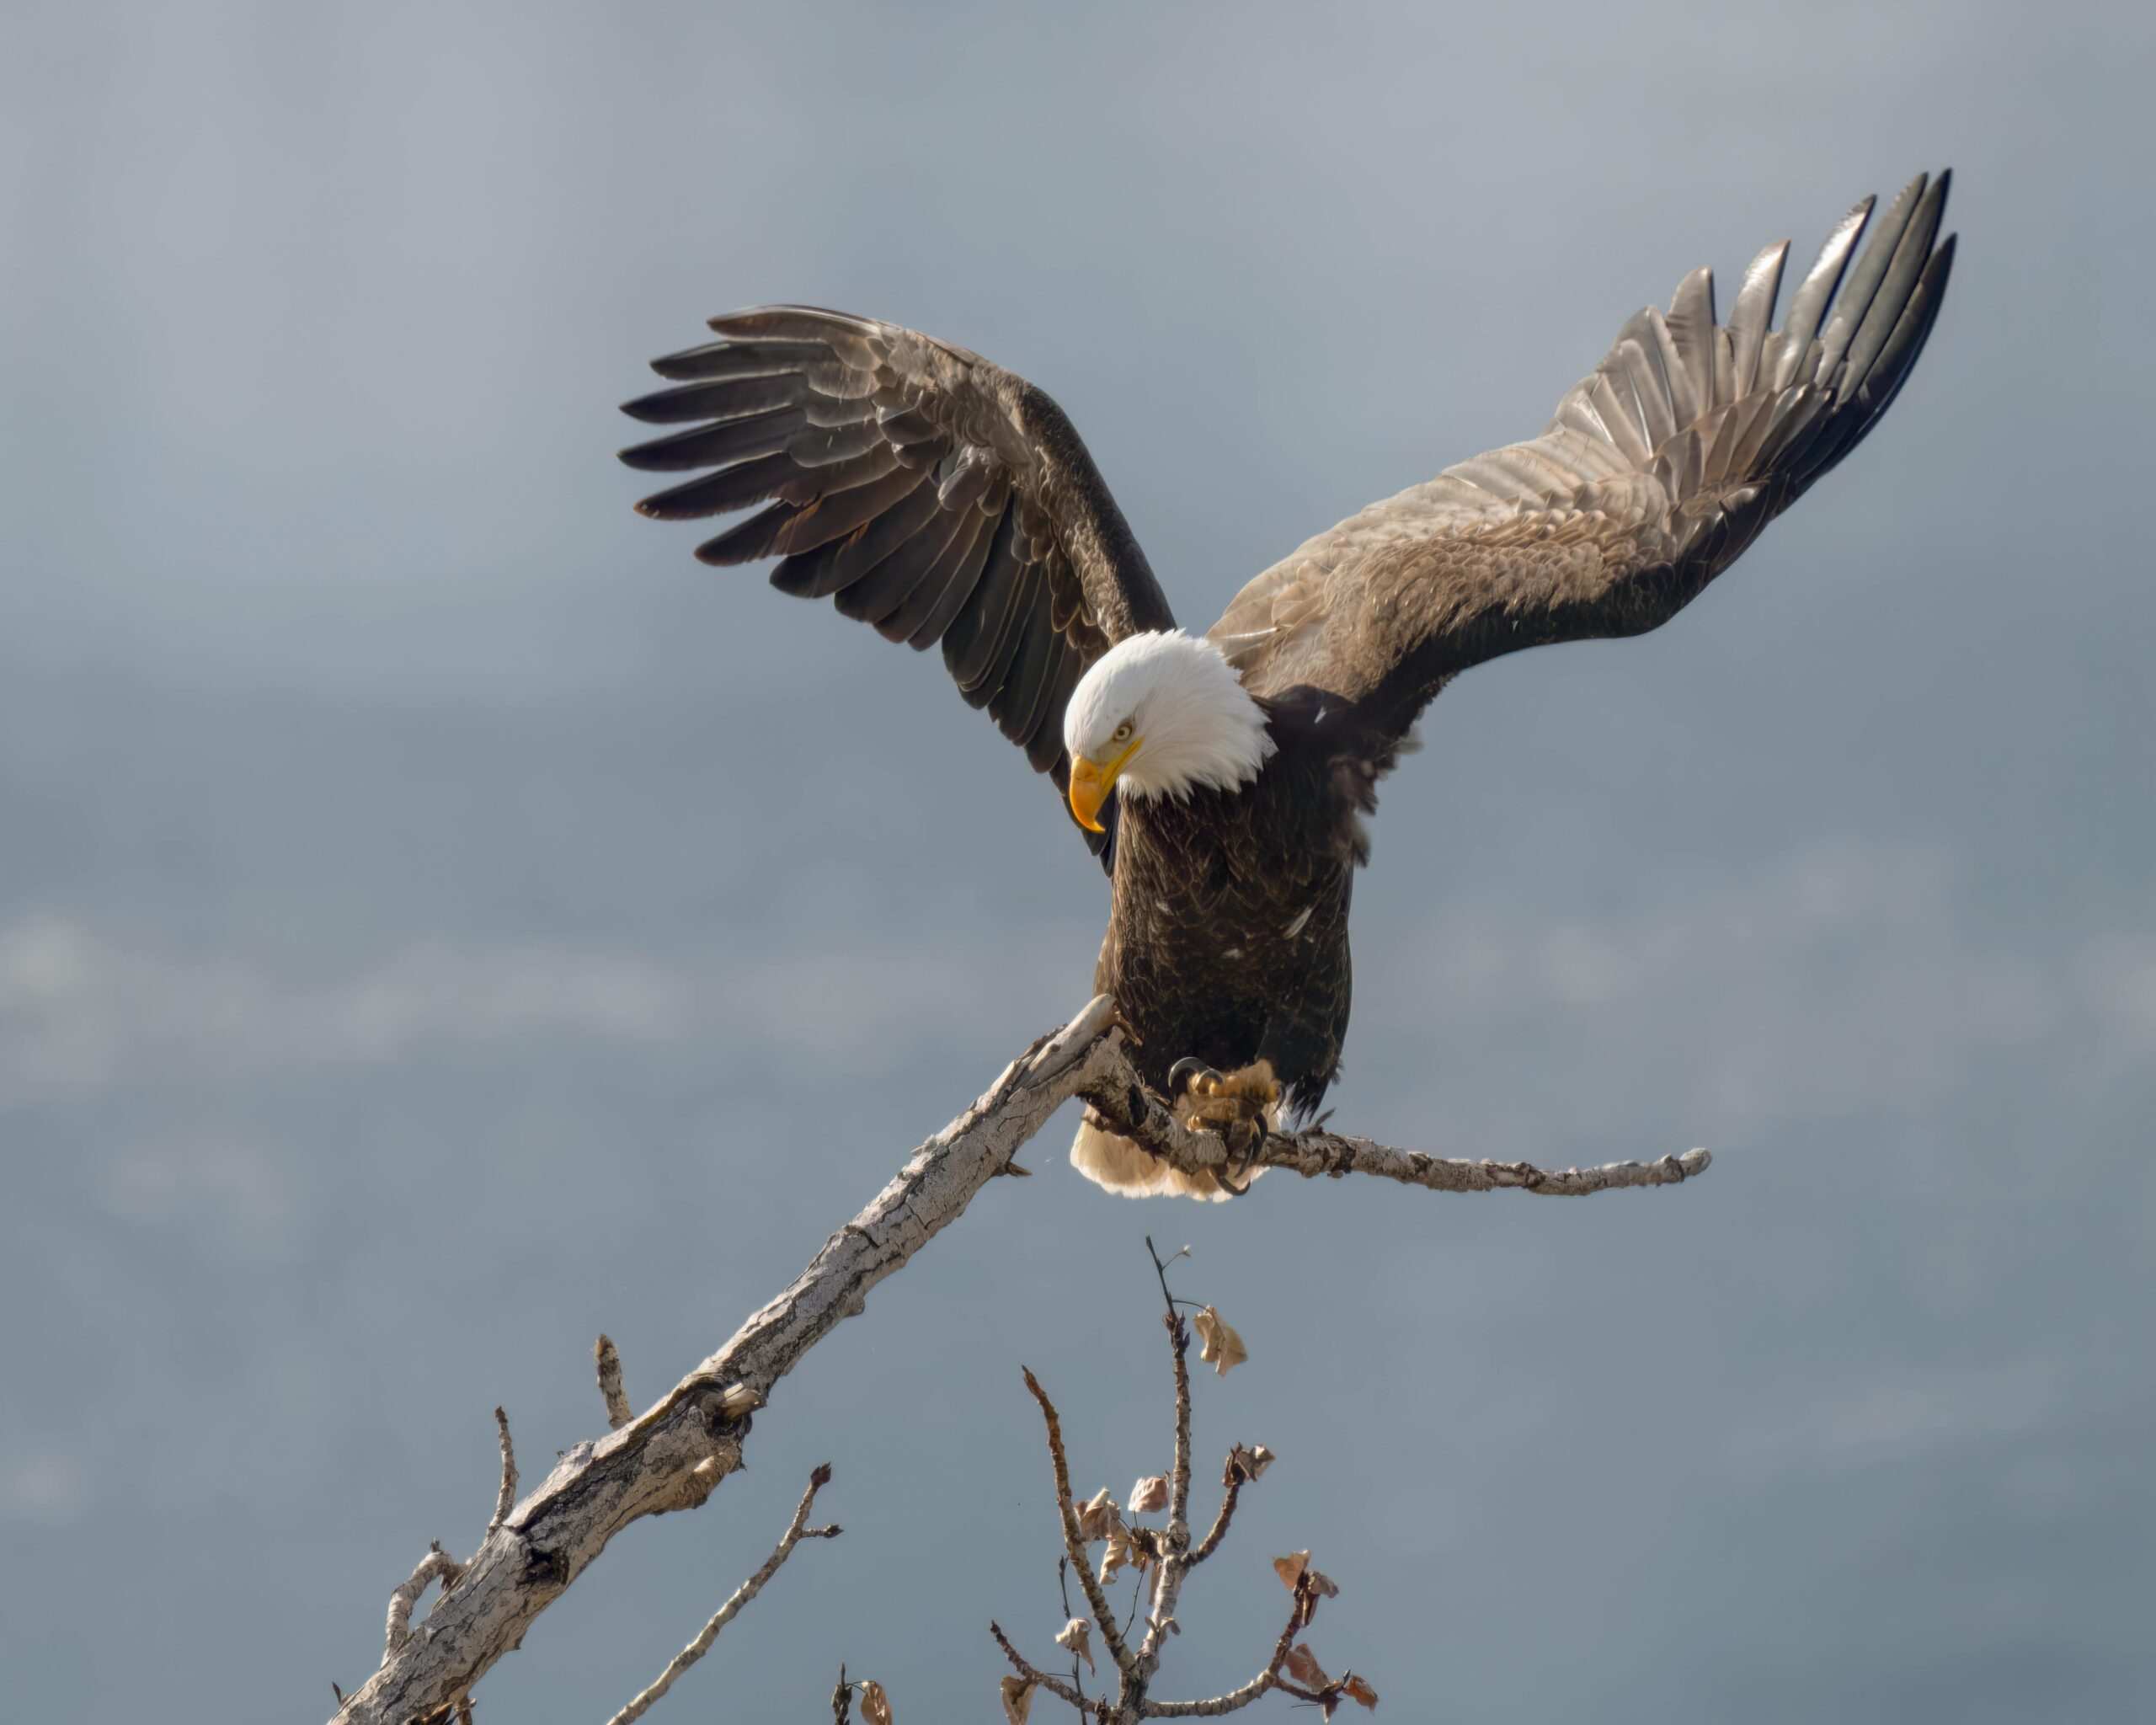 are there bald eagles in Eastern North Carolina